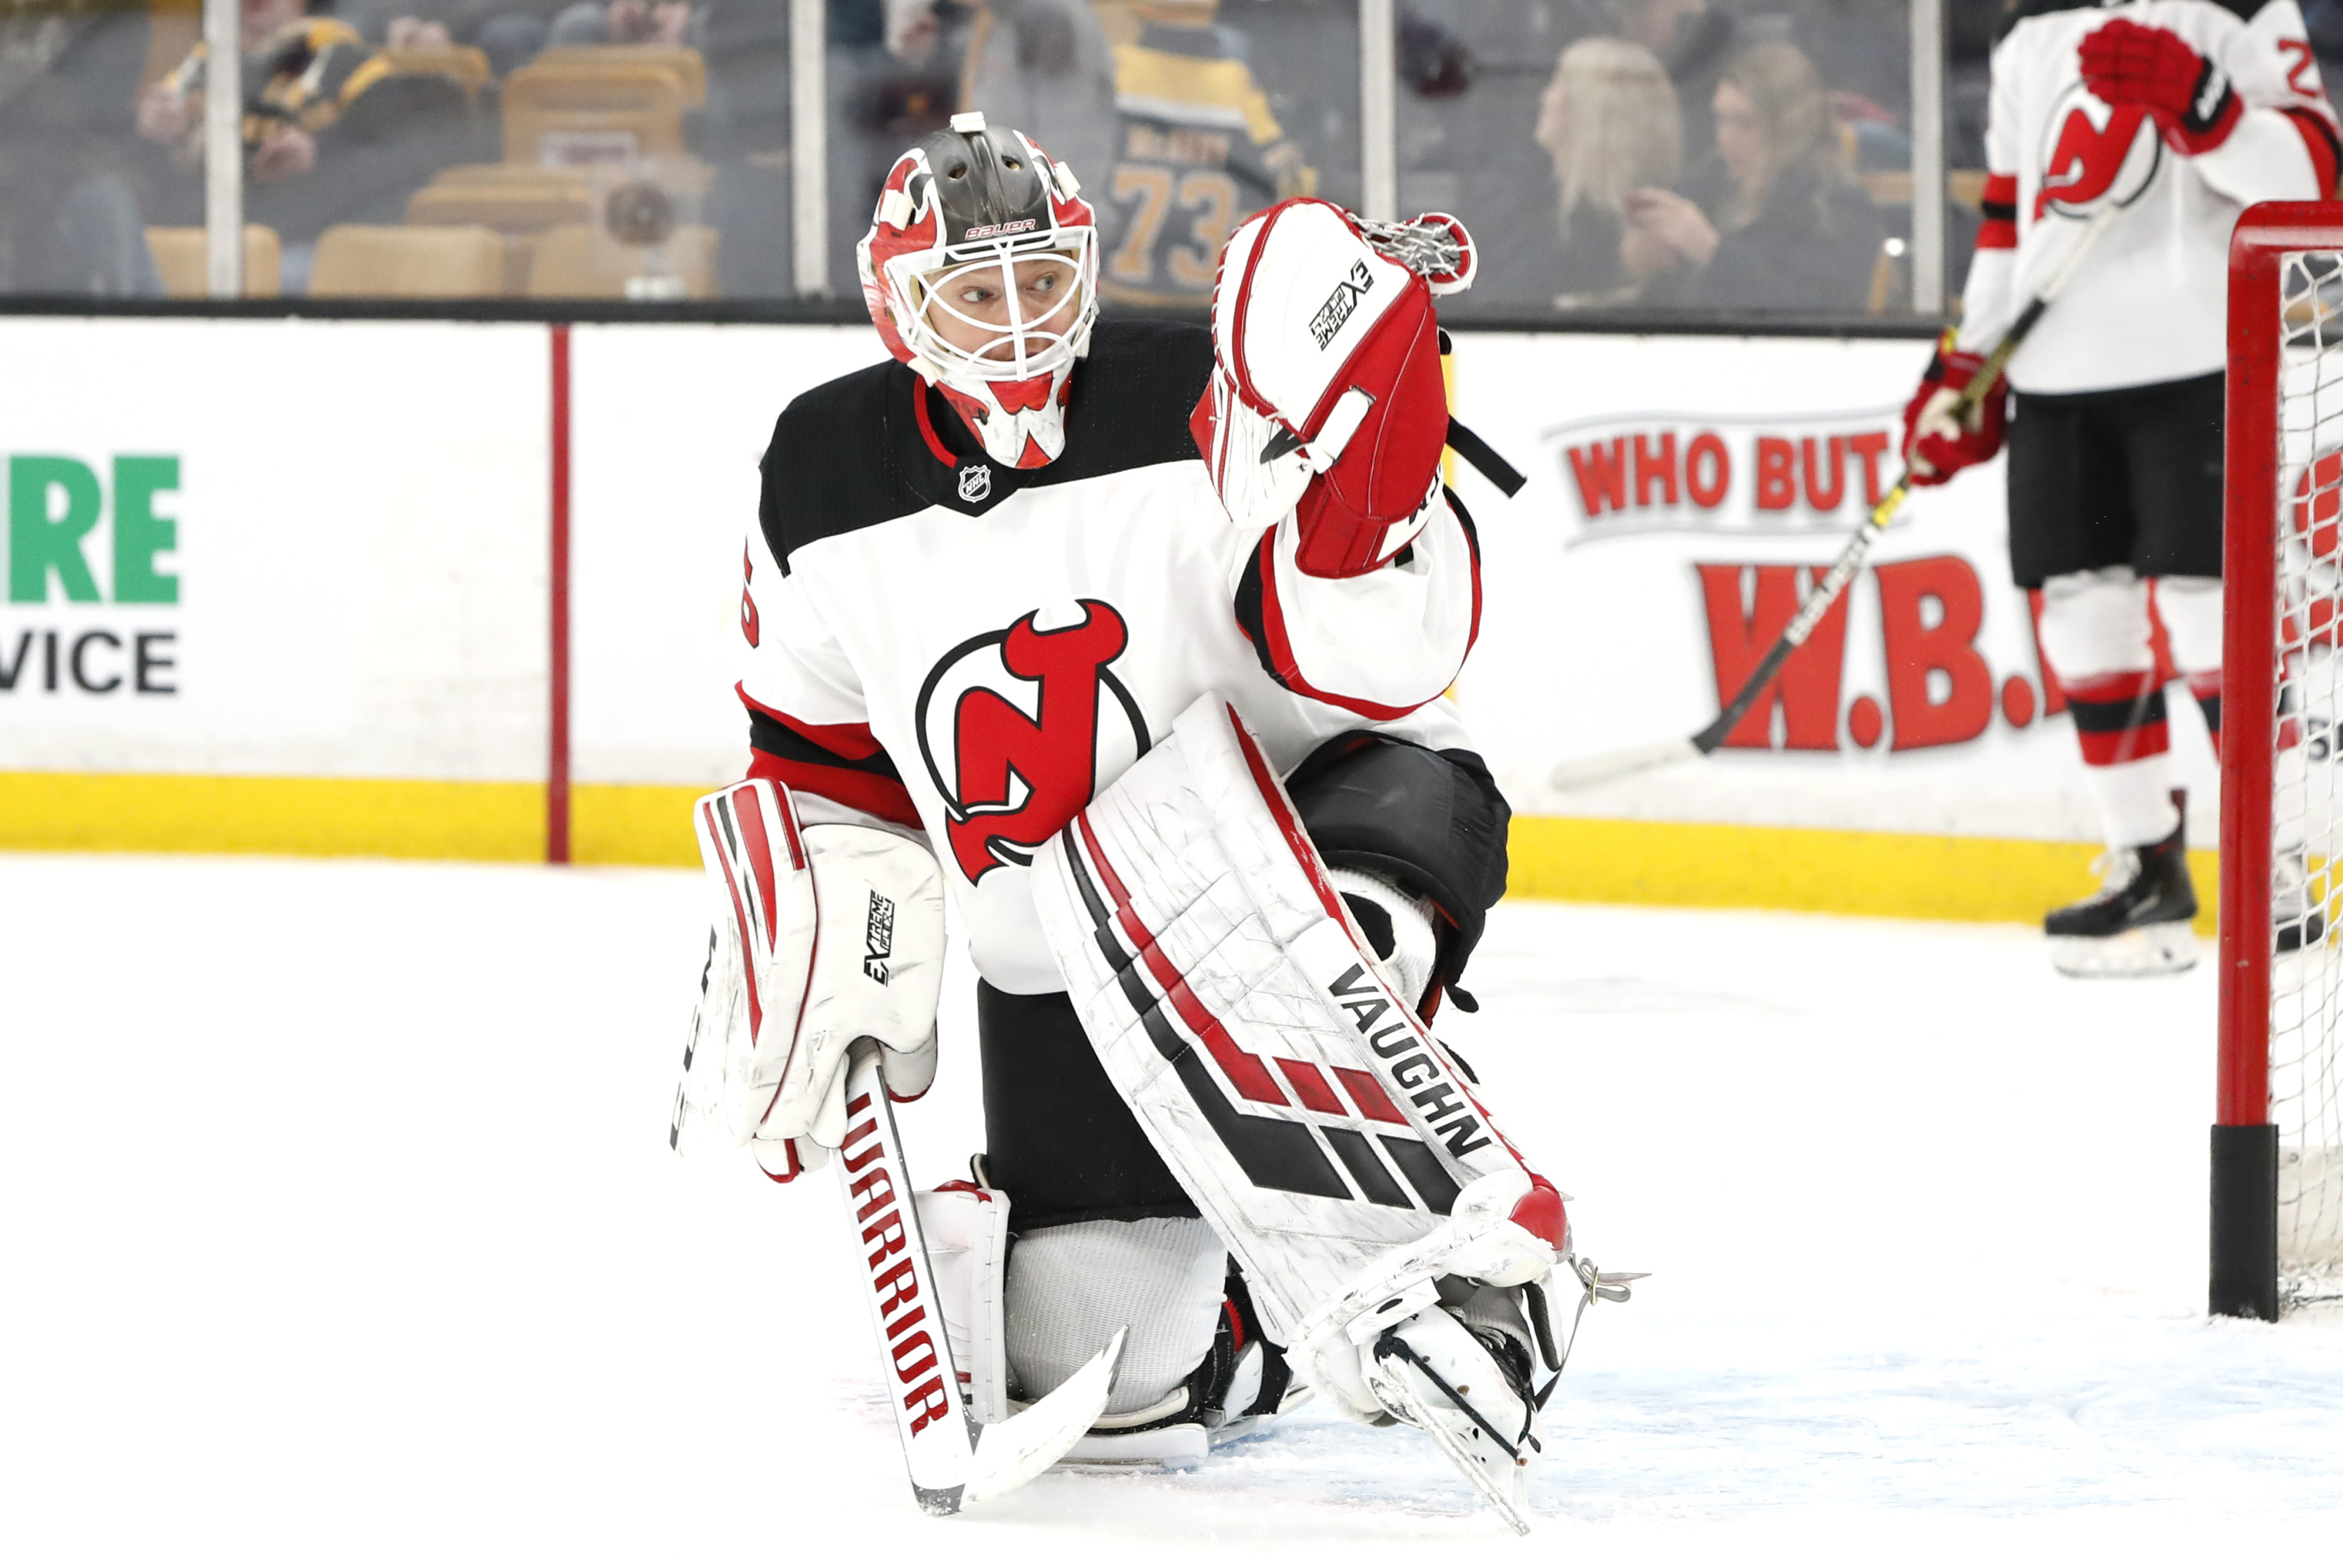 Brodeur: 'The future is bright' for Devils' Blackwood